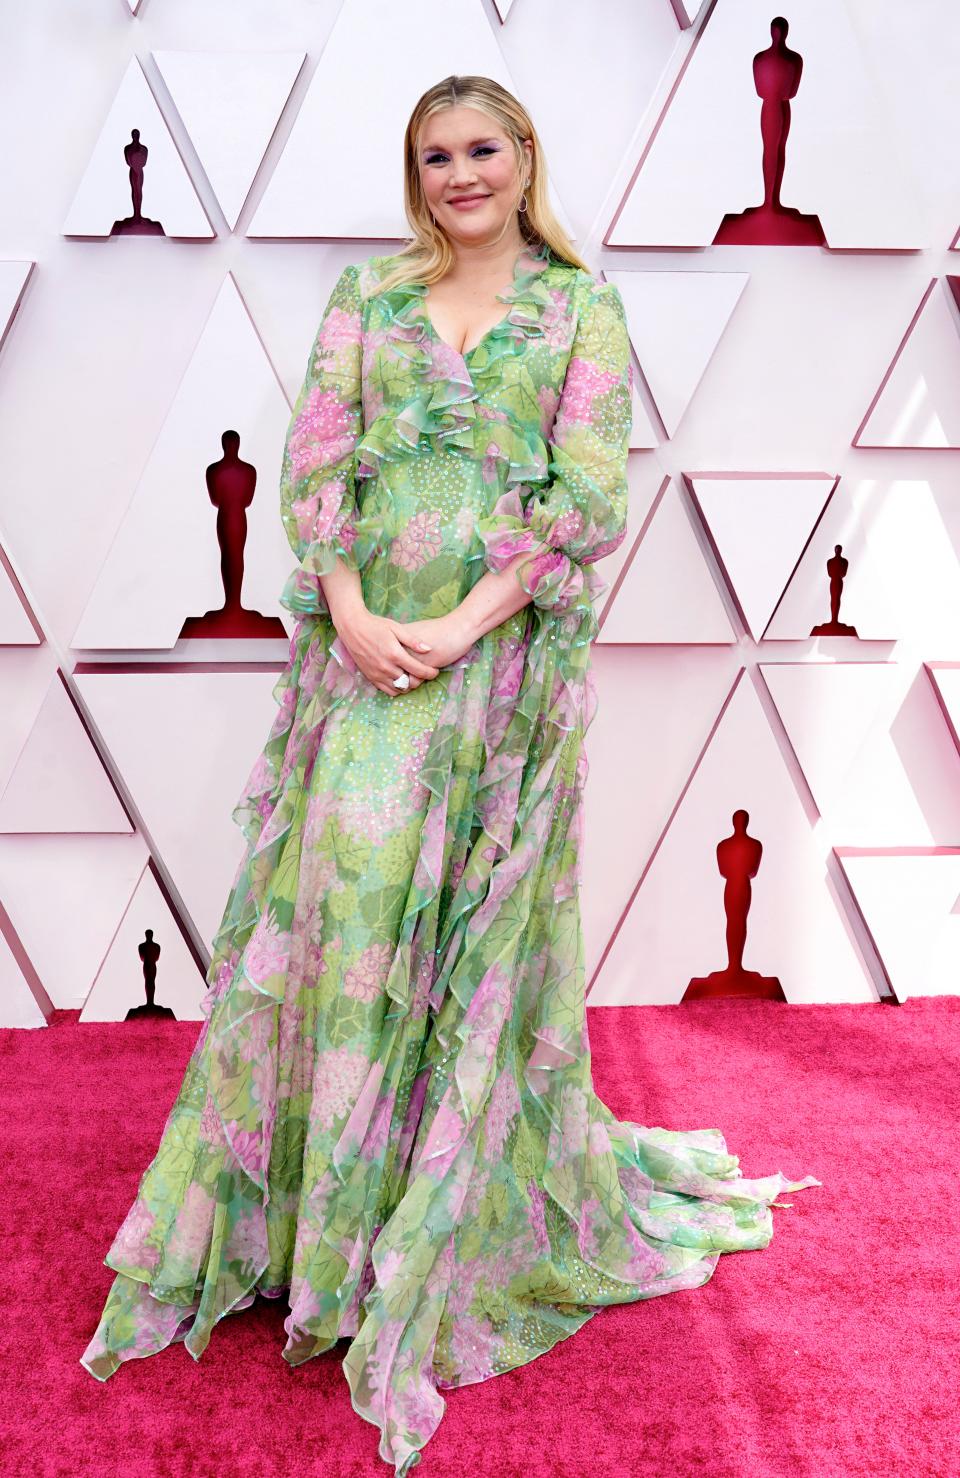 Emerald Fennell on the Oscars red carpet wearing GucciGetty